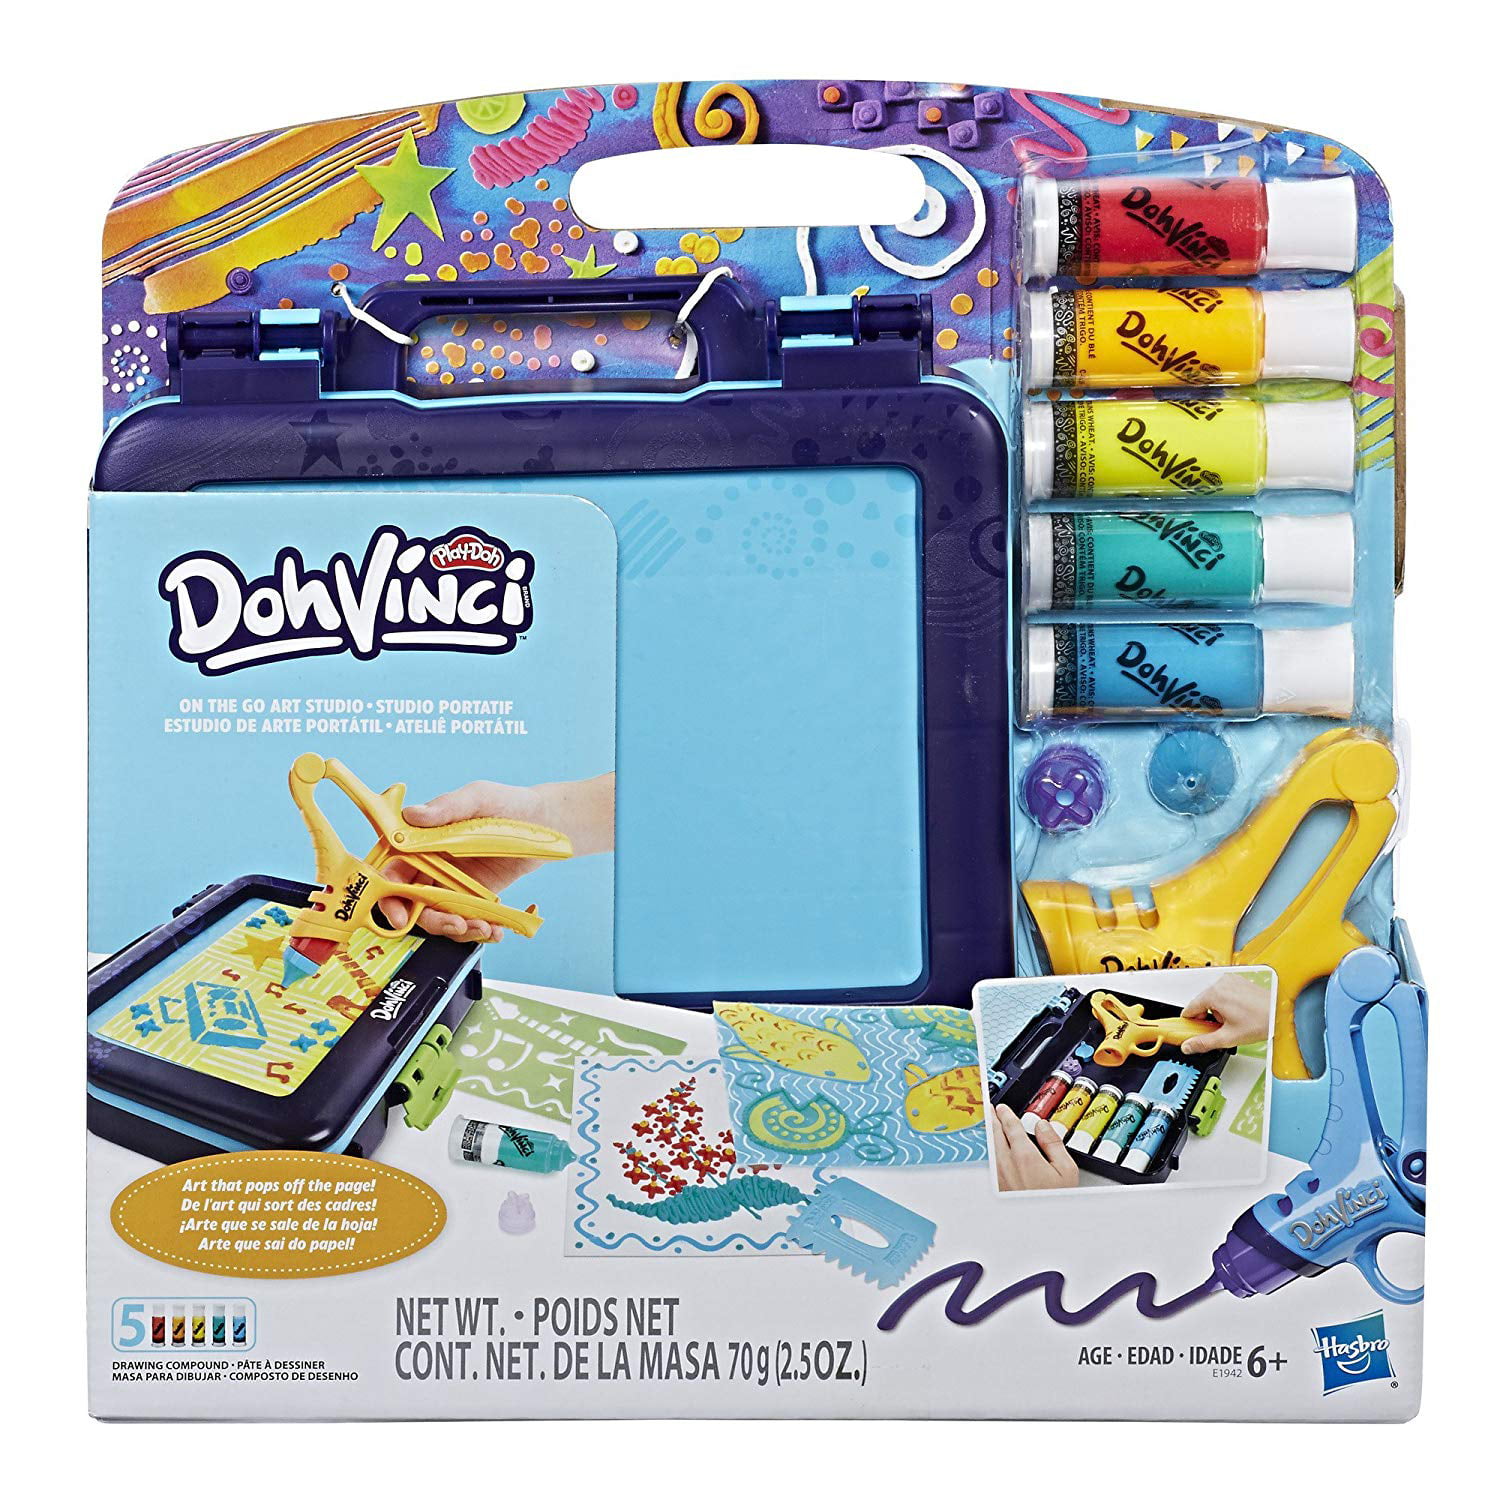 Game NEW Hasbro Play-doh DohVinci Essential Art Kit Set Toy Ages 6 